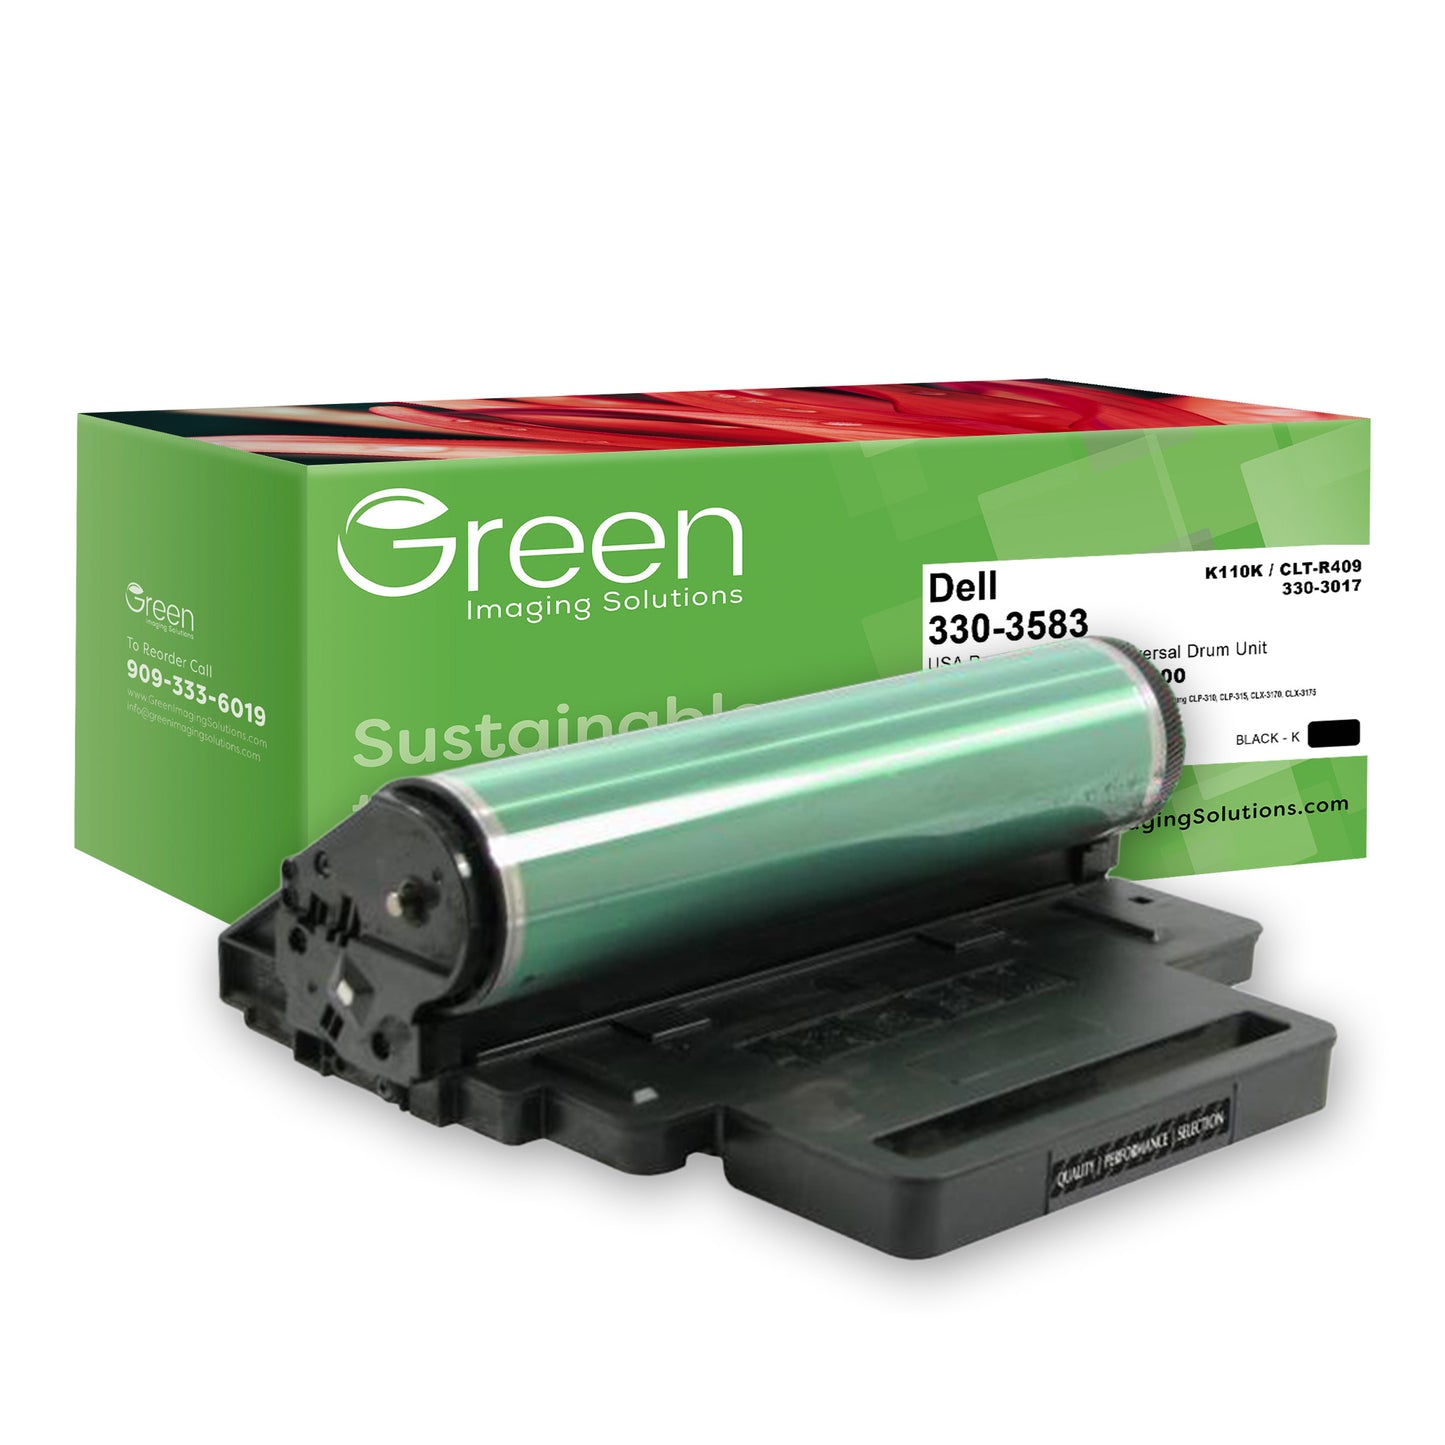 Green Imaging Solutions USA Remanufactured Universal Drum Unit for Dell 1230, Samsung CLP-315